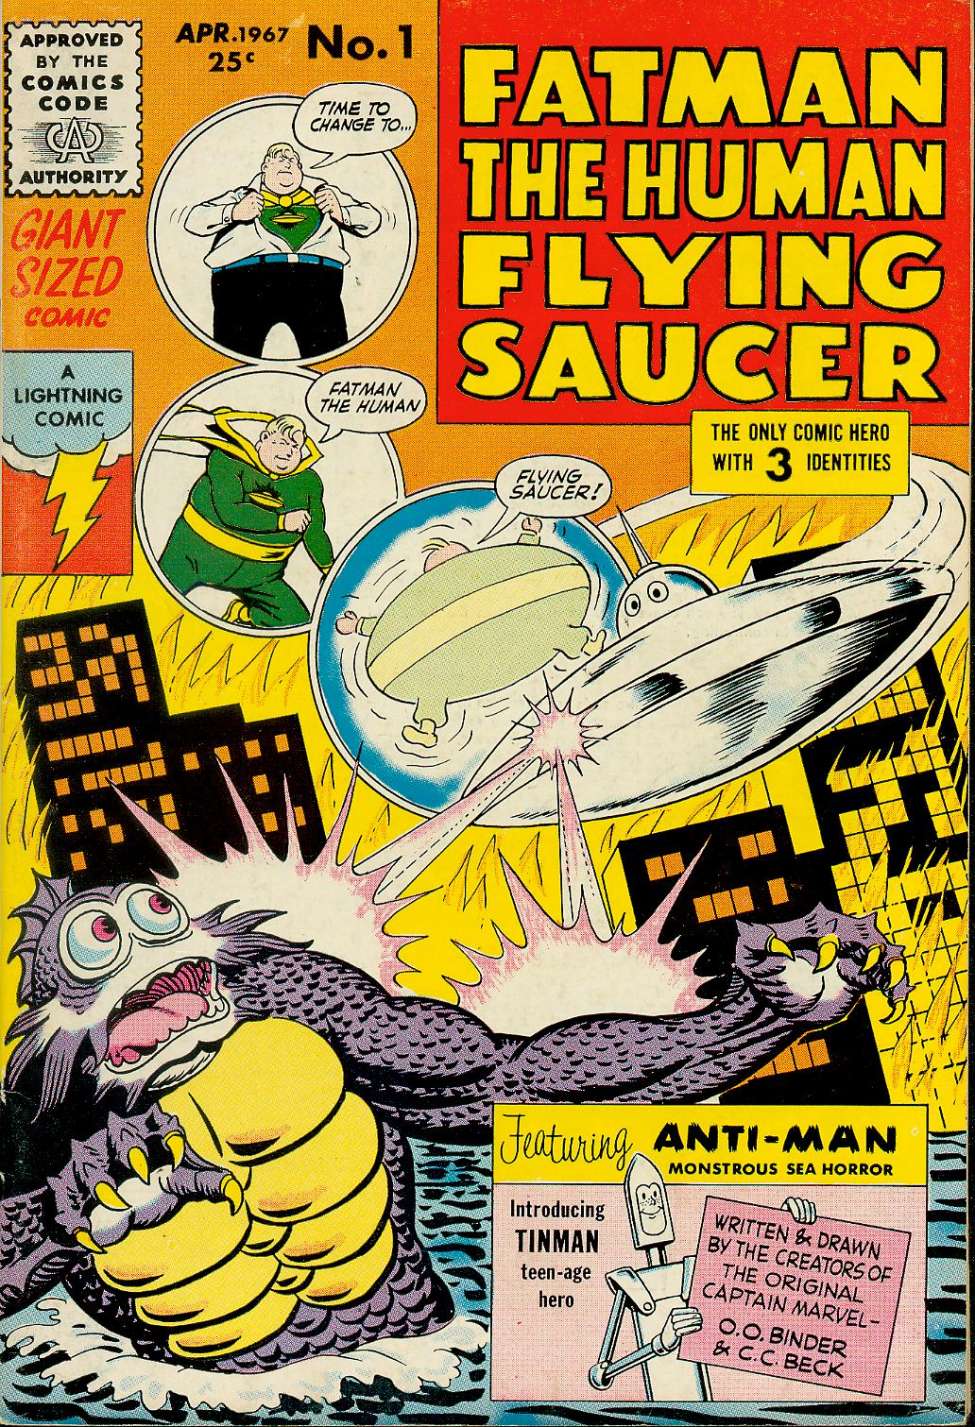 Book Cover For Fatman the Human Flying Saucer 1